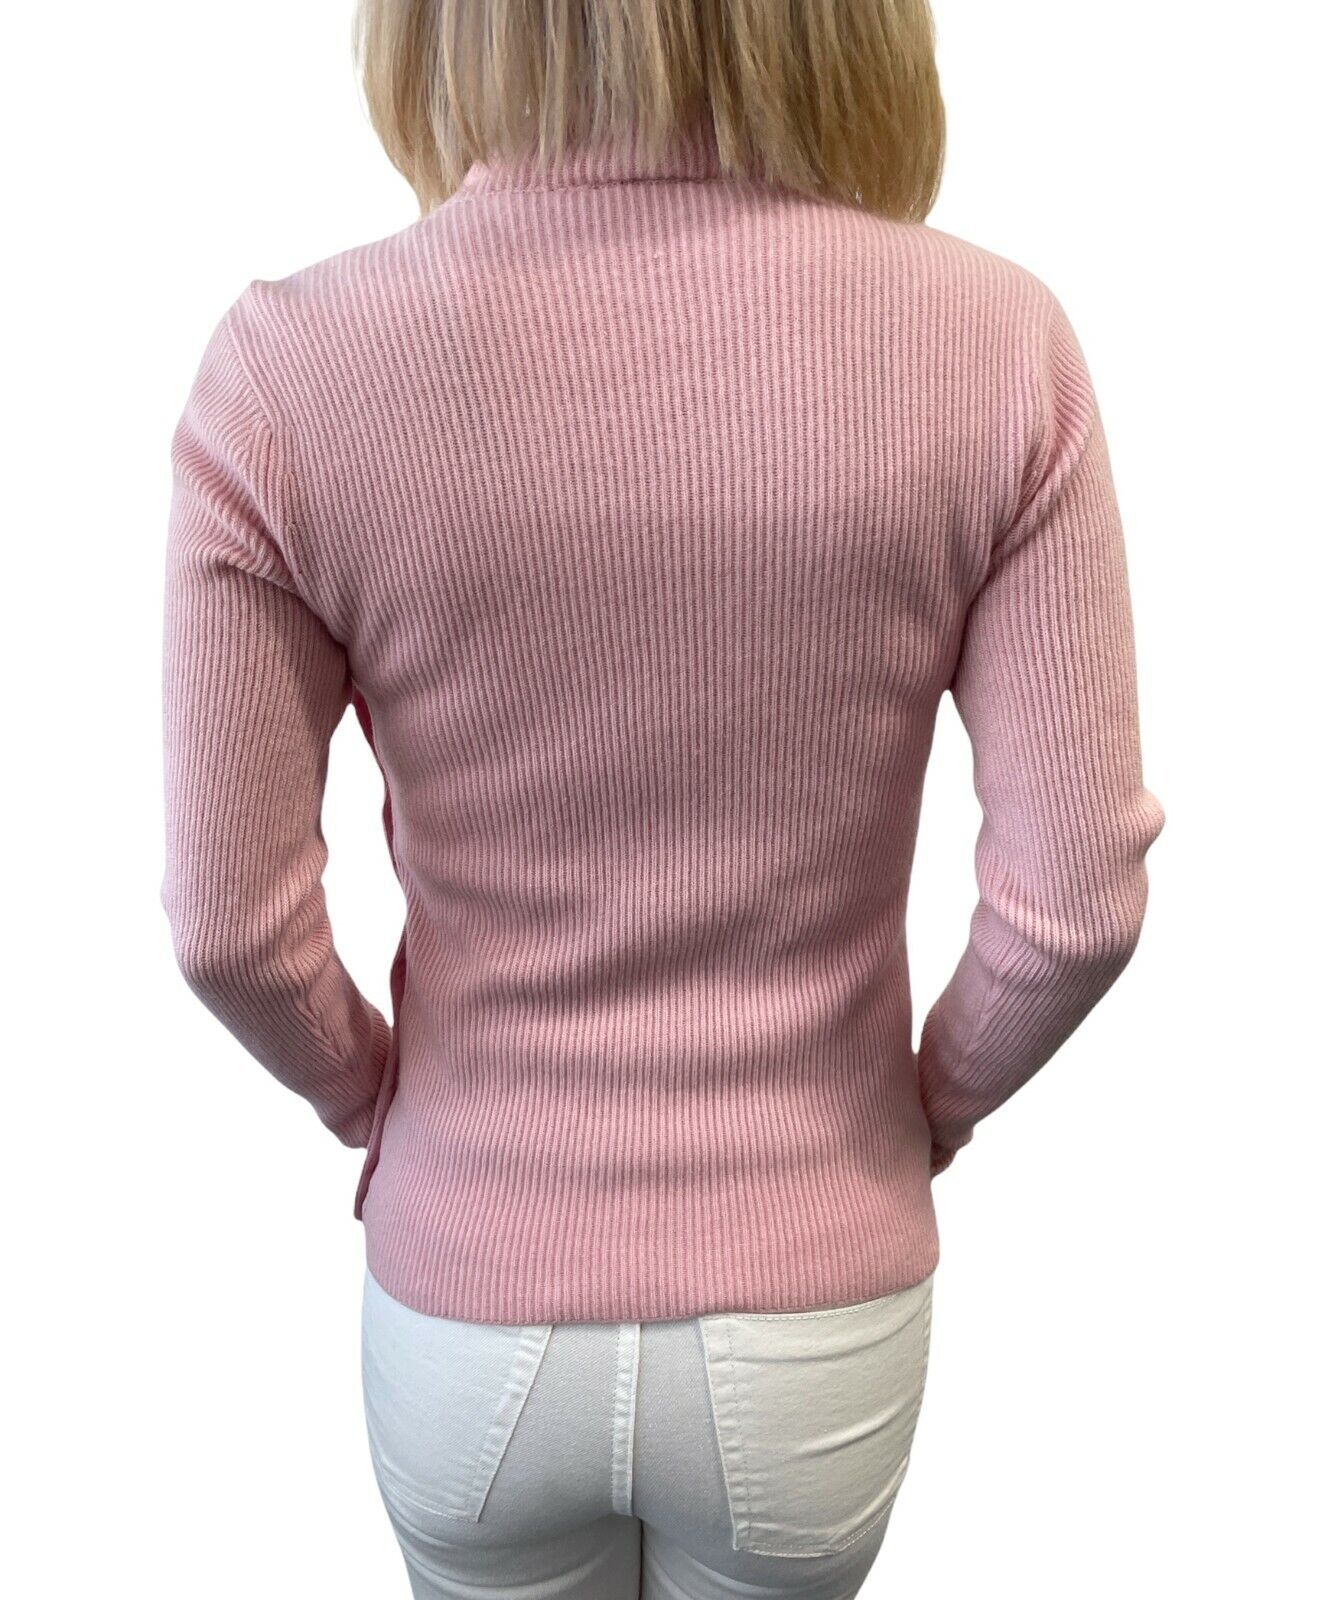 CHANEL Vintage 96A Coco Mark Logo Mock Neck Sweater Tops Knit #40 Pink RankAB